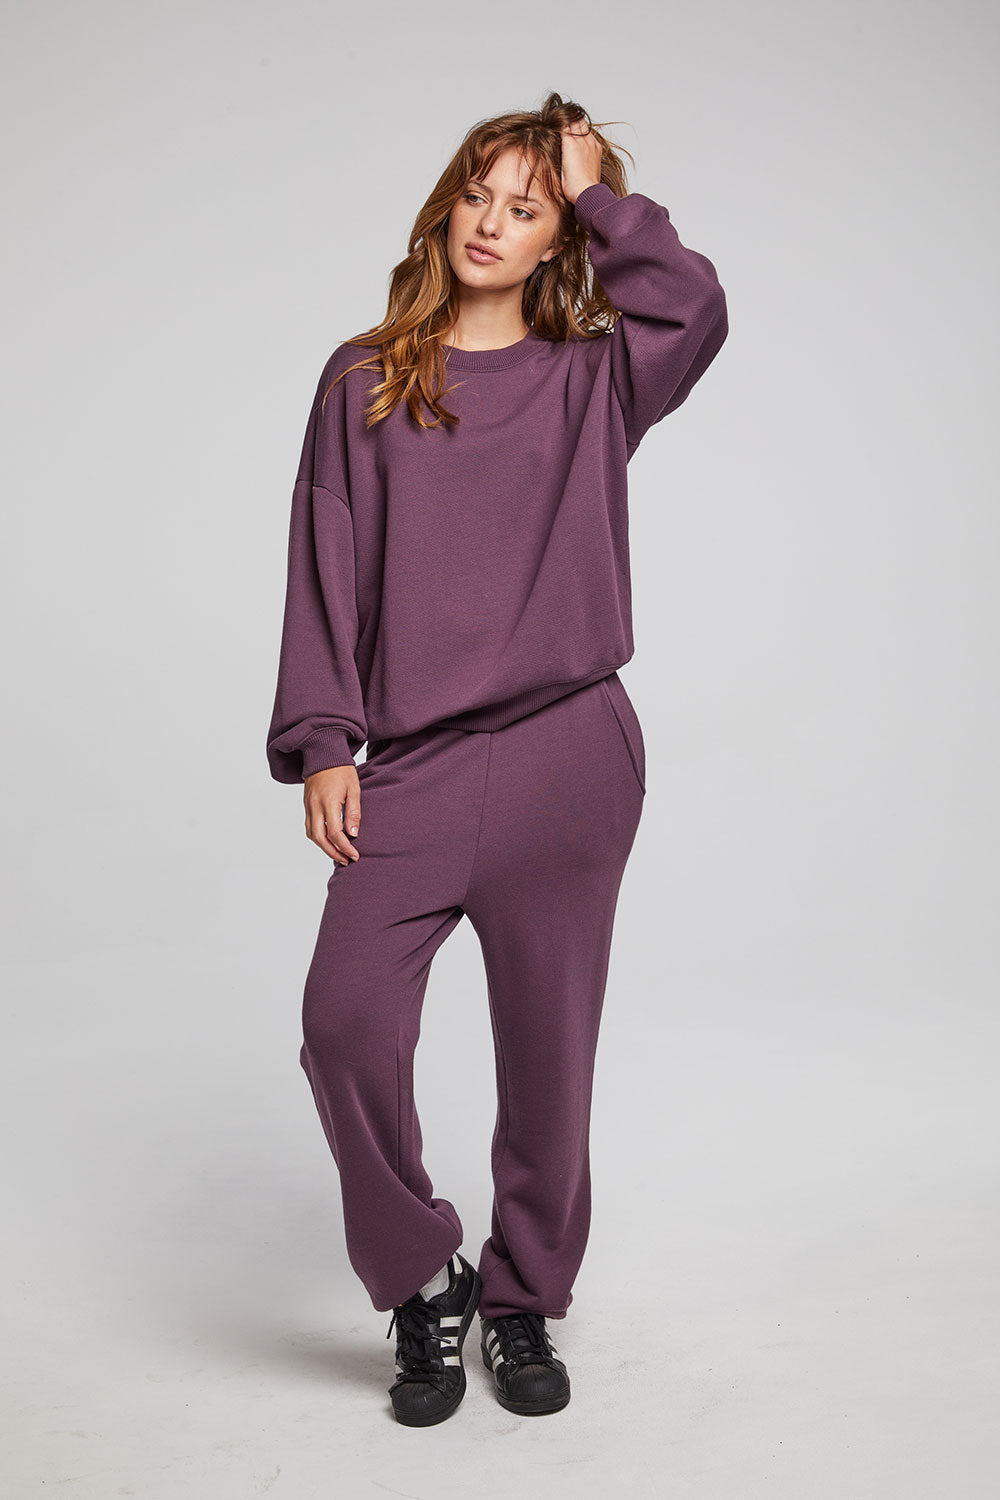 chaser-casbah-plum-pullover-06